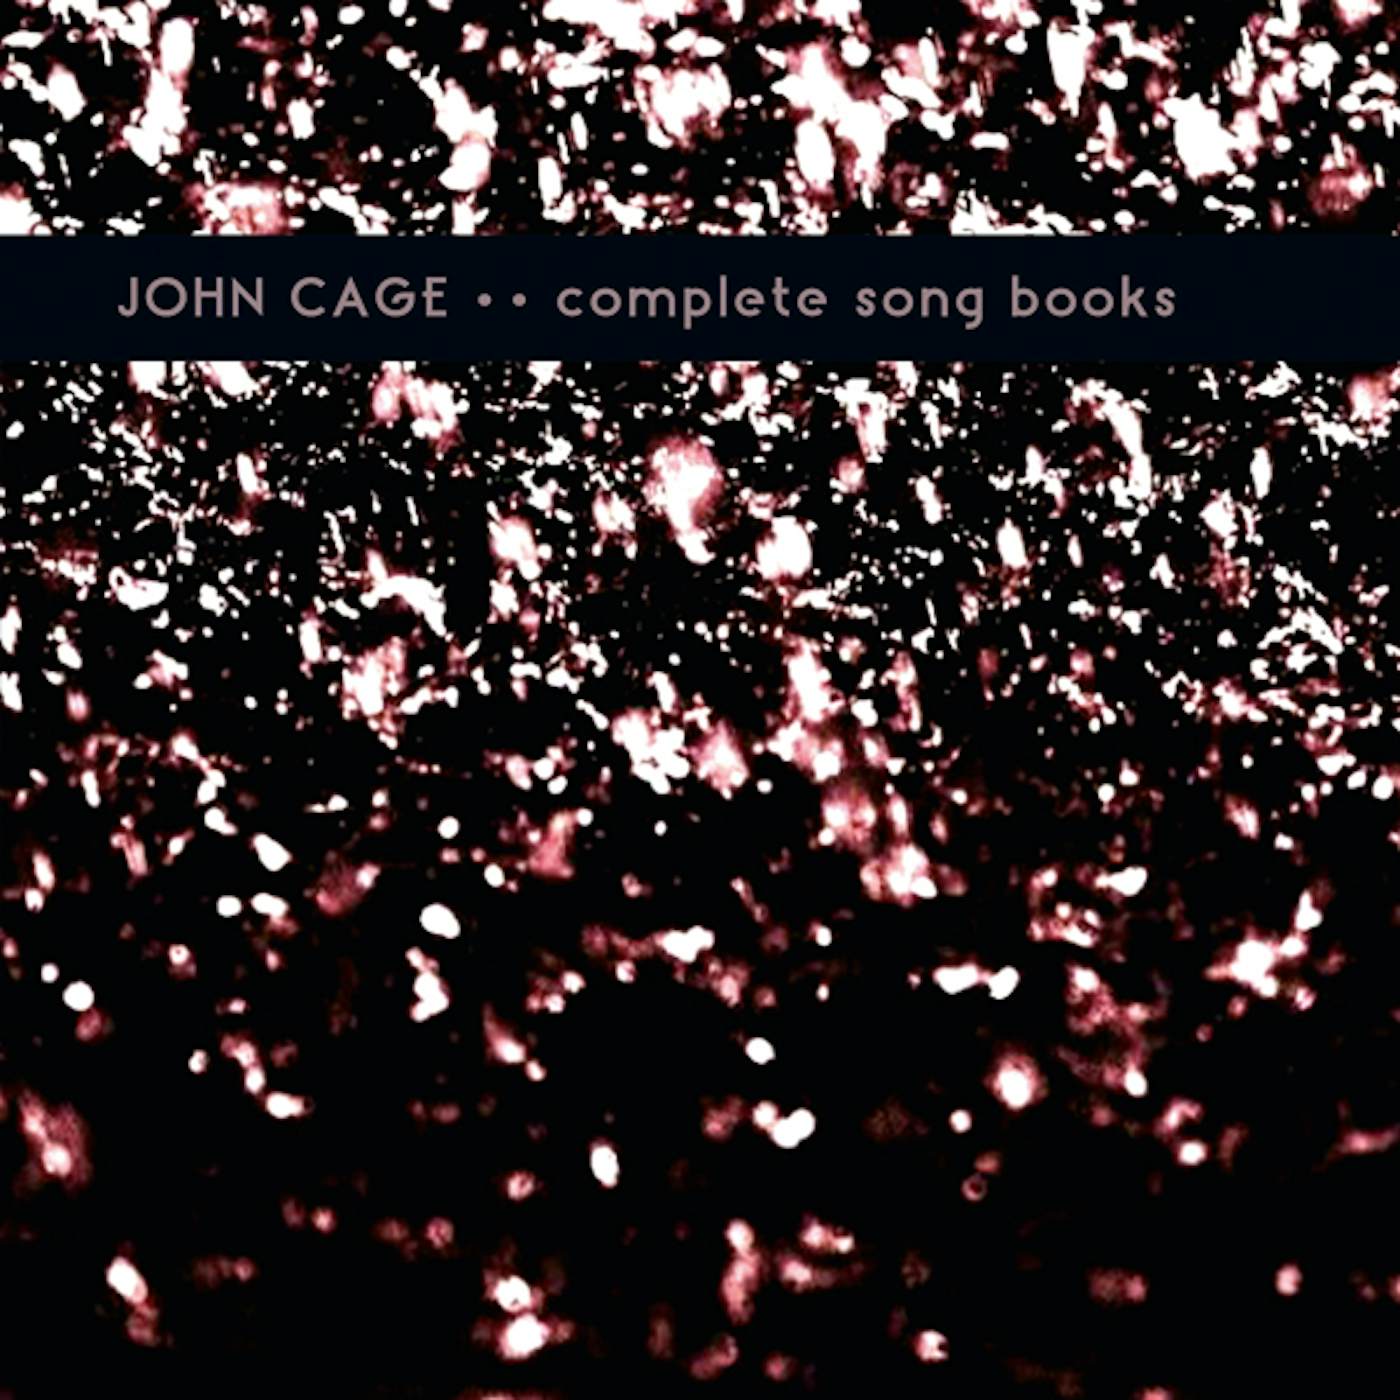 John Cage COMPLETE SONG BOOKS Vinyl Record